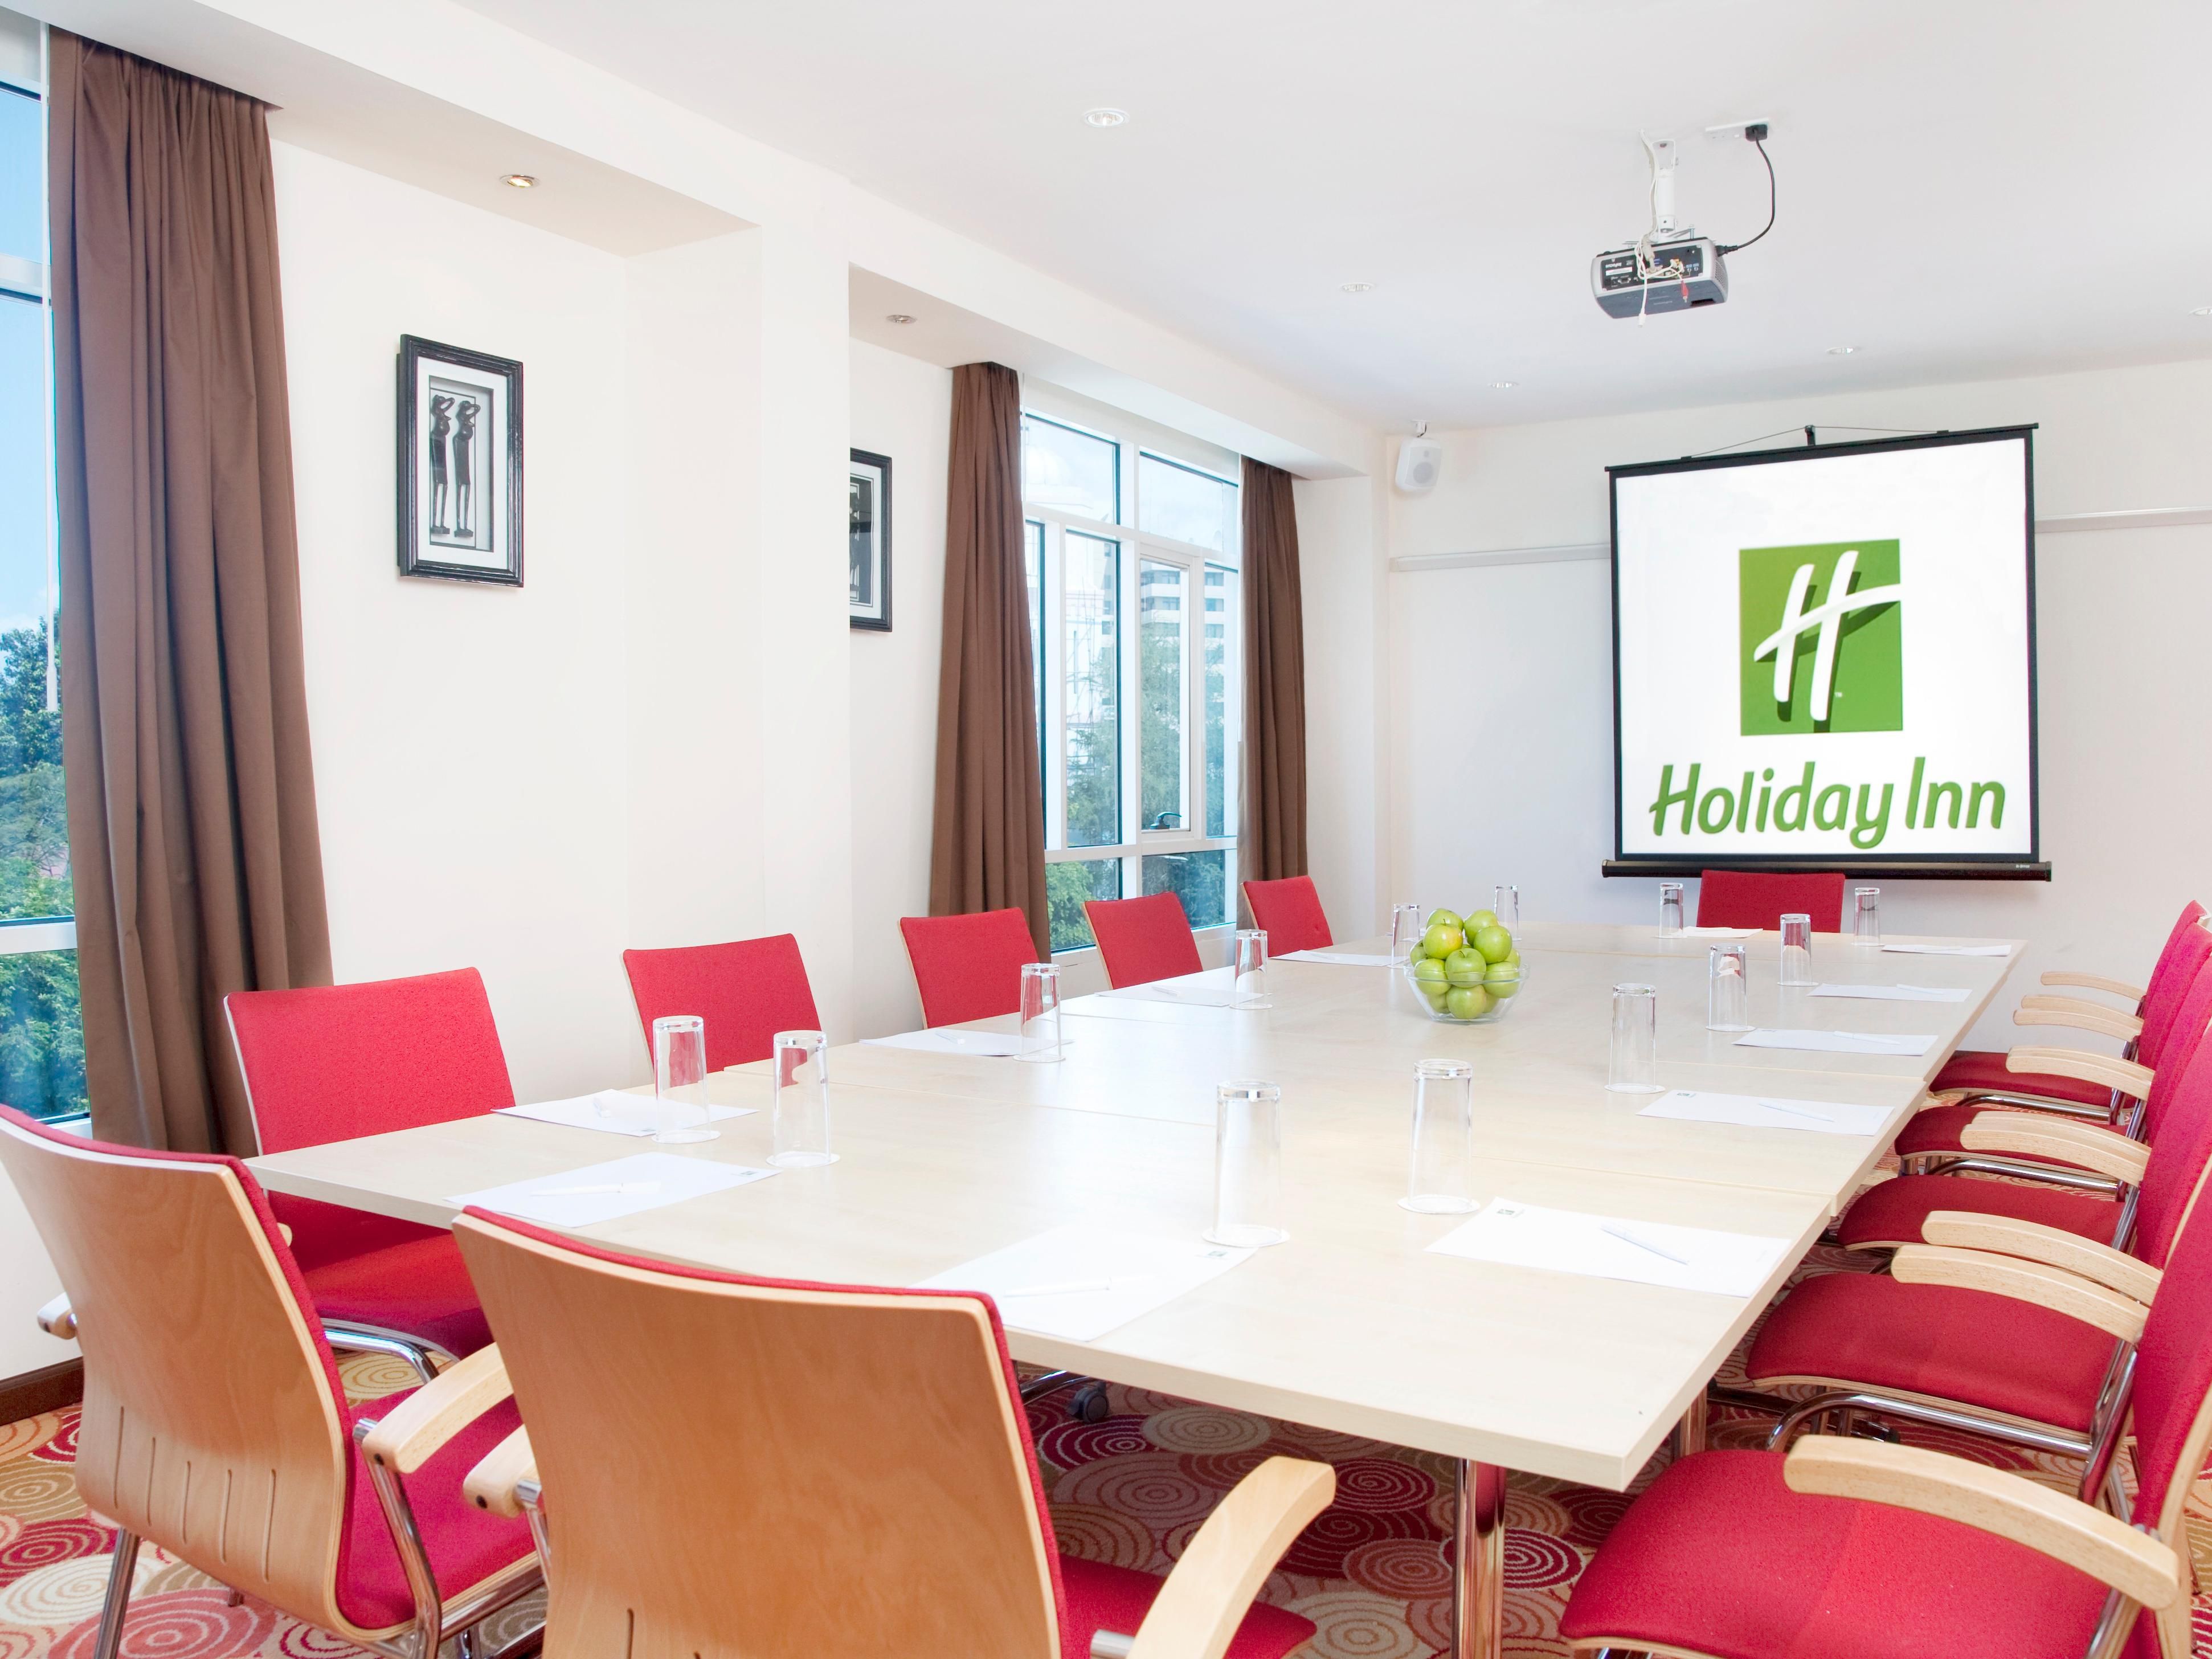 We have 06 conference rooms and 02 Conference & event halls, have been designed to meet the modern technologies such as Zoom conferencing facility which enables to connect up to 100 pax worldwide, Free High-speed Wi-Fi, Audio-visual equipment & full time IT support.